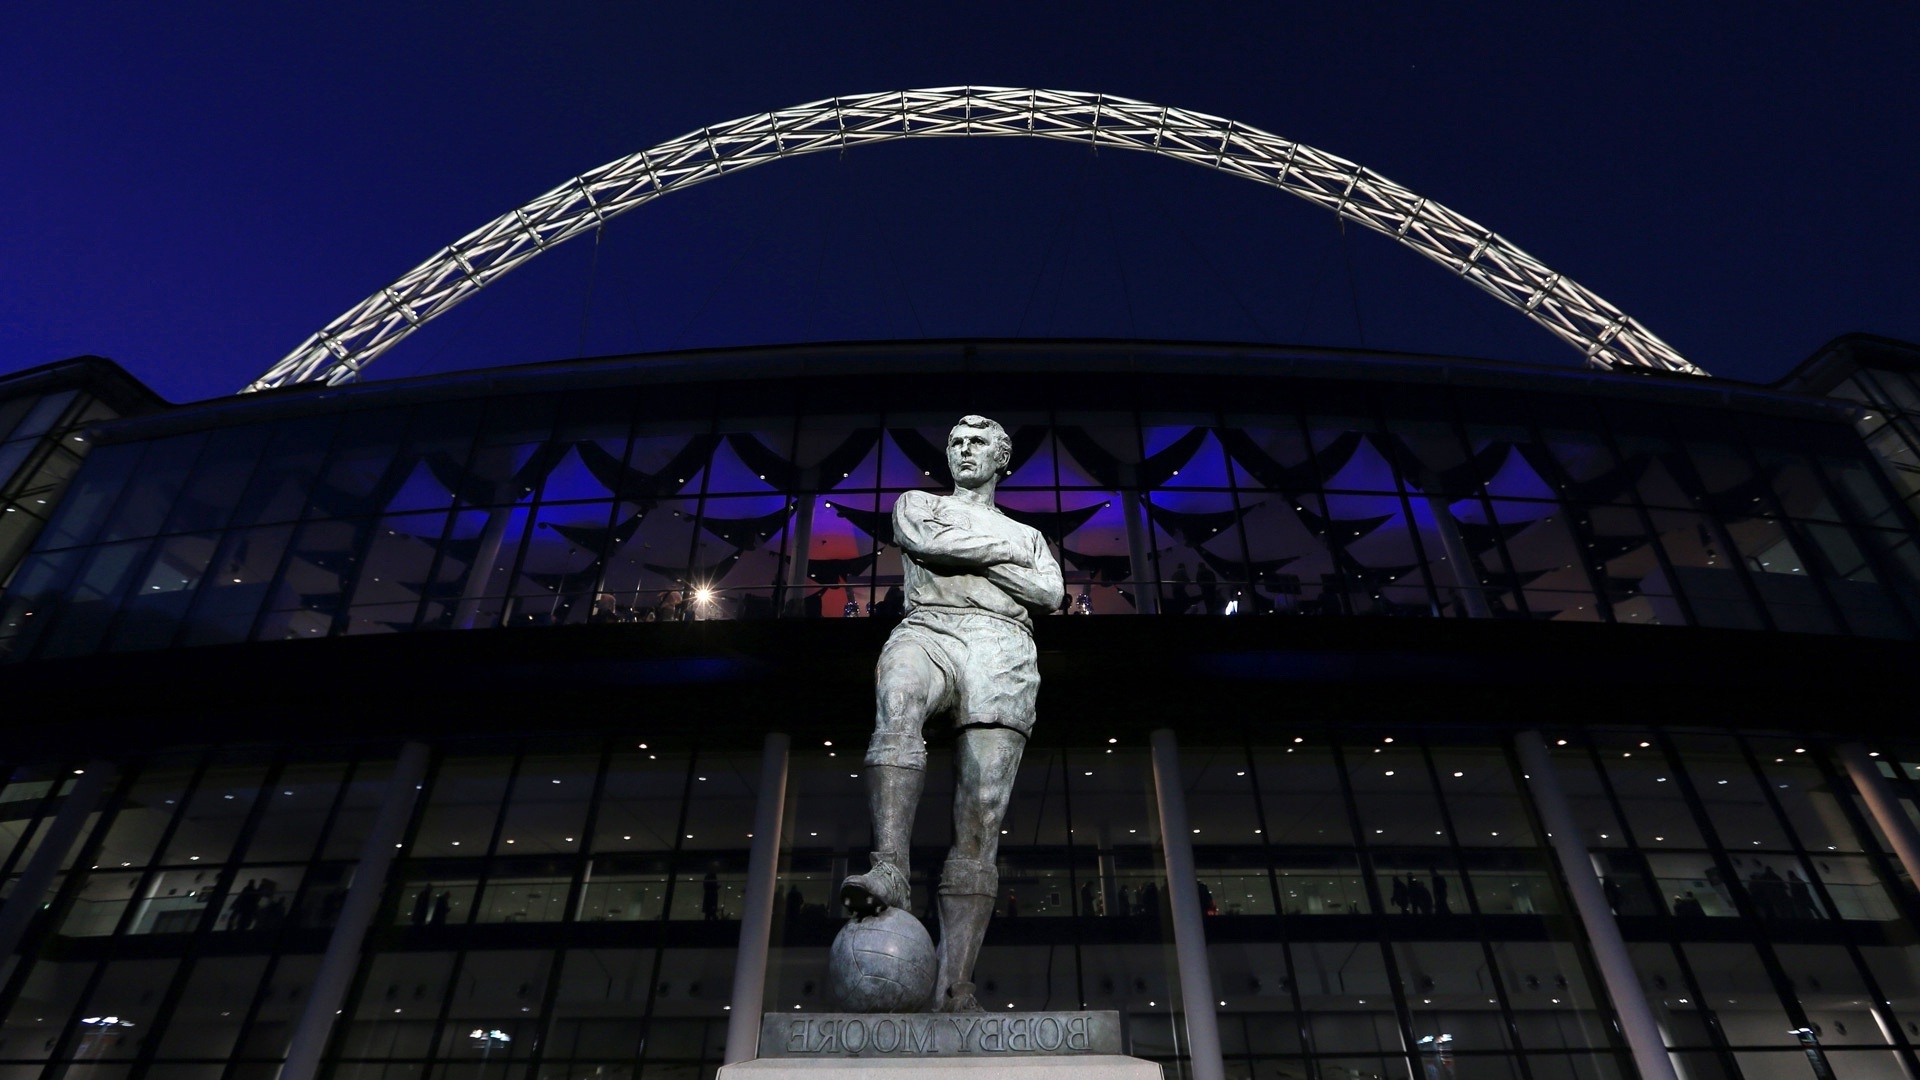 Wembley Stadium: The Bobby Moore statue, A bronze sculpture of the former West Ham and England footballer. 1920x1080 Full HD Background.